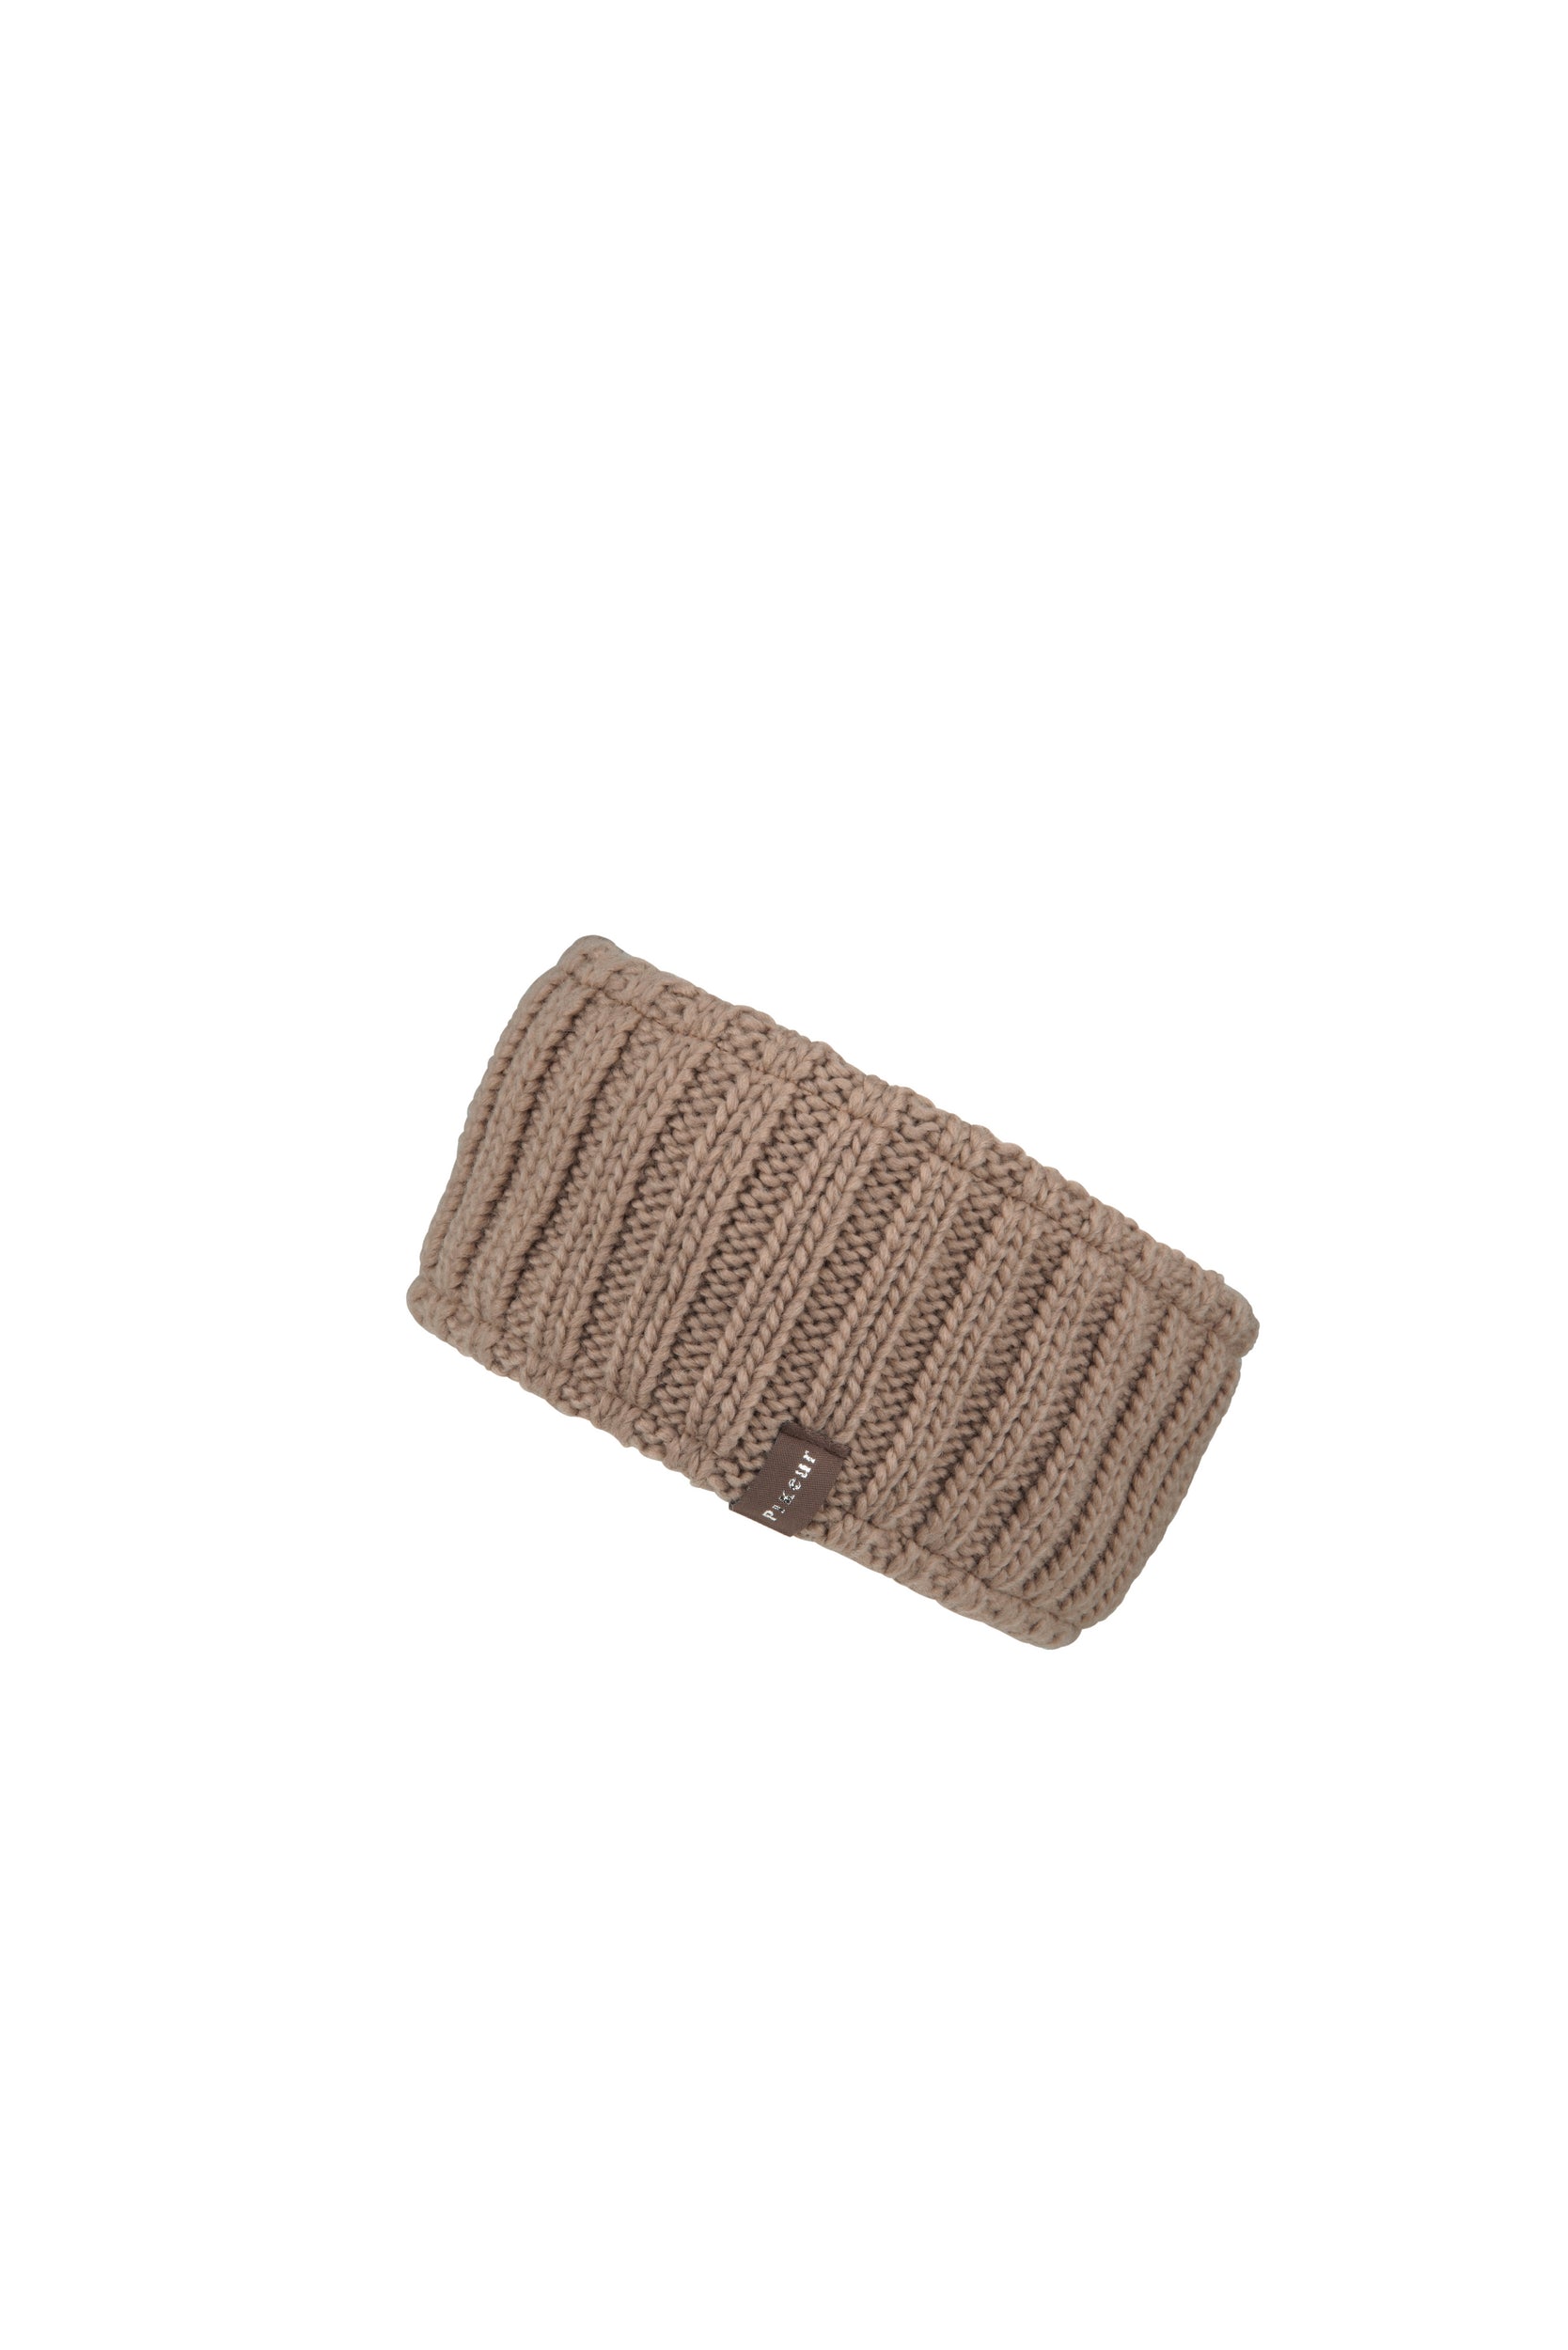 Pikeur soft taupe knitted headband